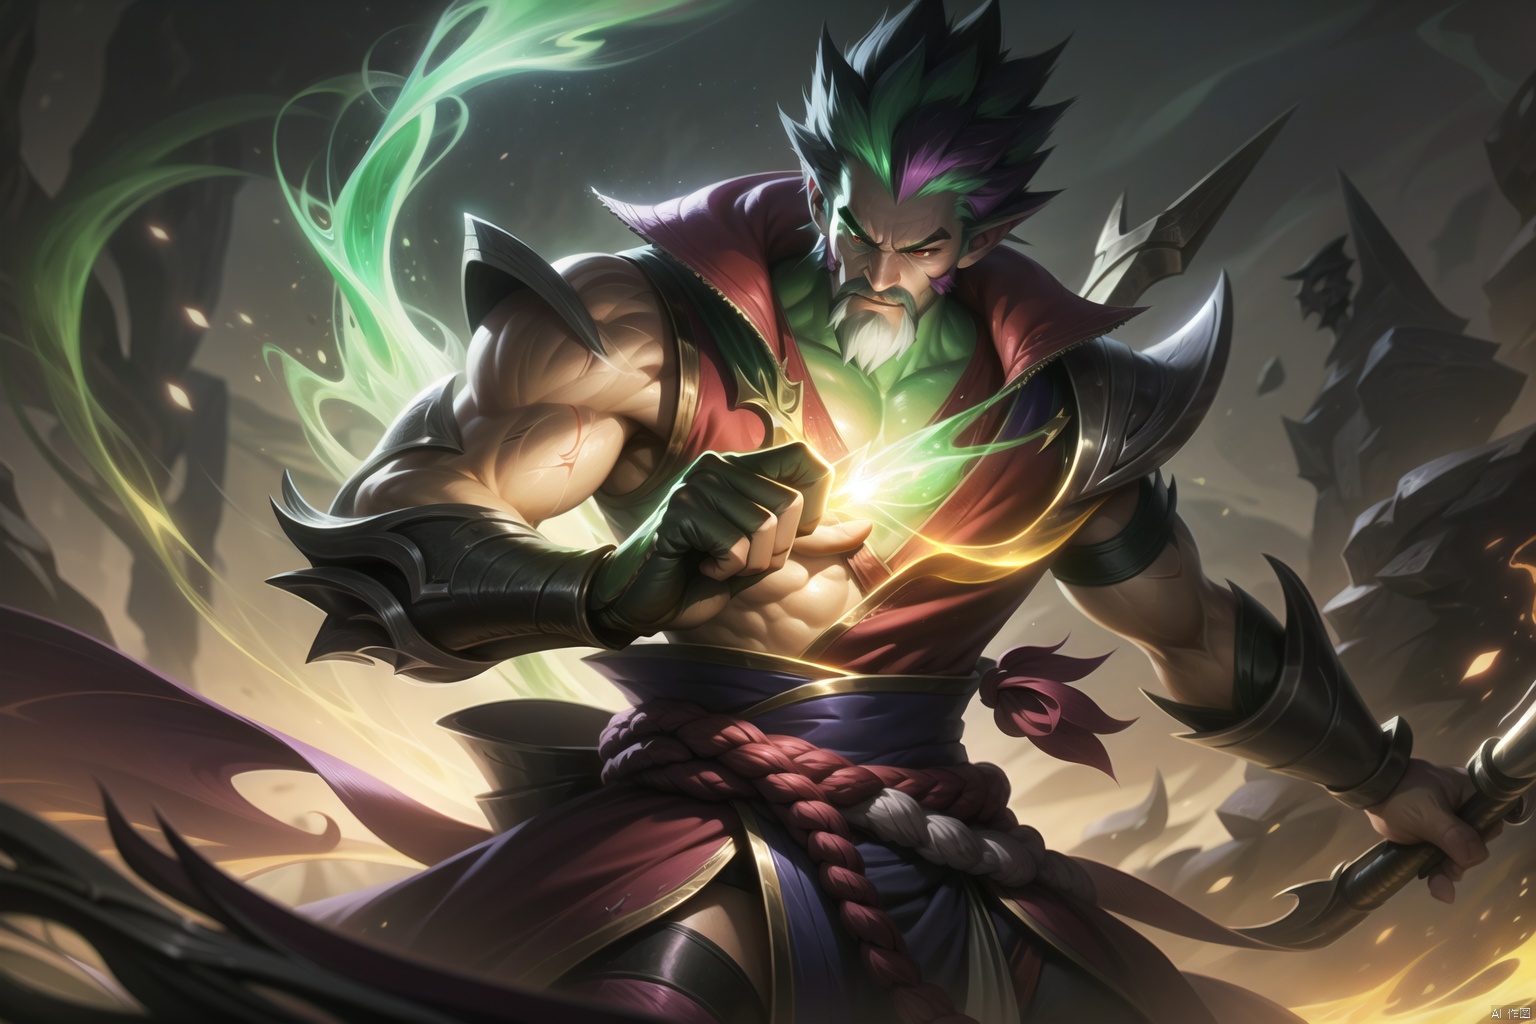  The heroic character in "League of Legends", he wears warrior armor, exudes a green aura, and holds a big knife in his hand. A close-up of a character, this painting adopts the fantasy art style of "League of Legends" illustrations. --ar 128:85, , songoku,black monkey king,uchiha sasuke